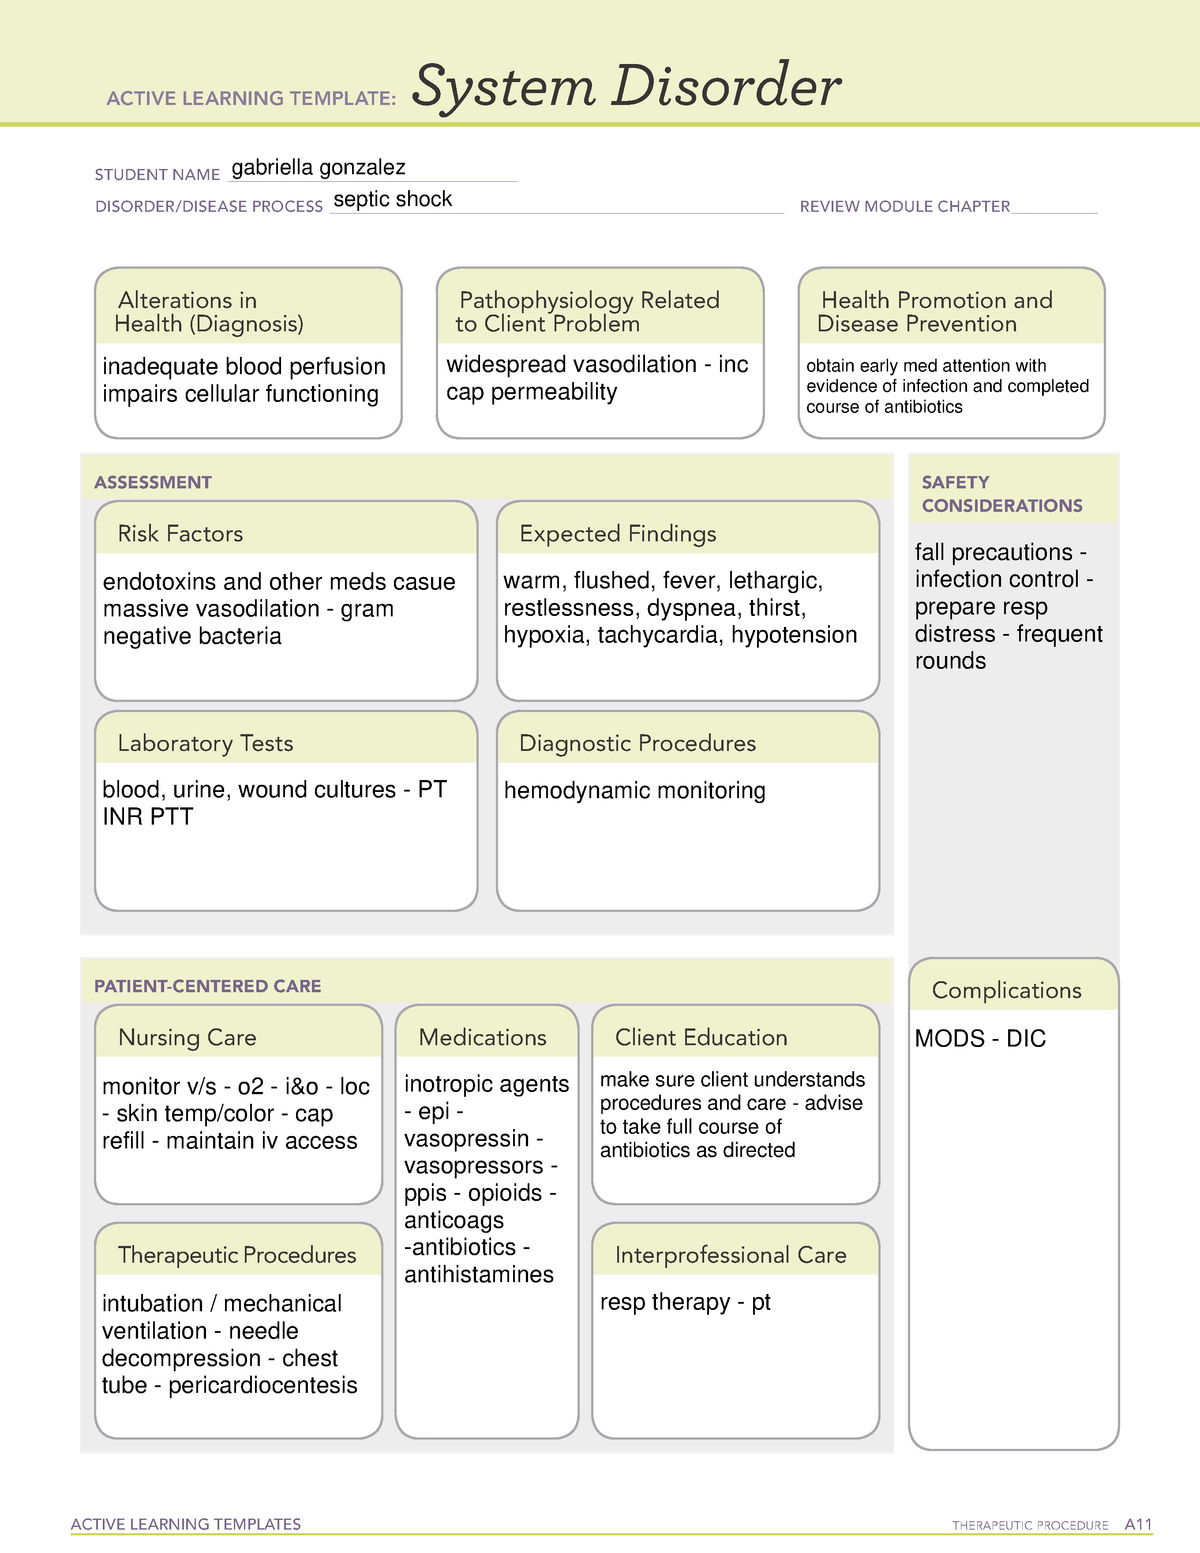 ALT system disorder septic shock ACTIVE LEARNING TEMPLATES